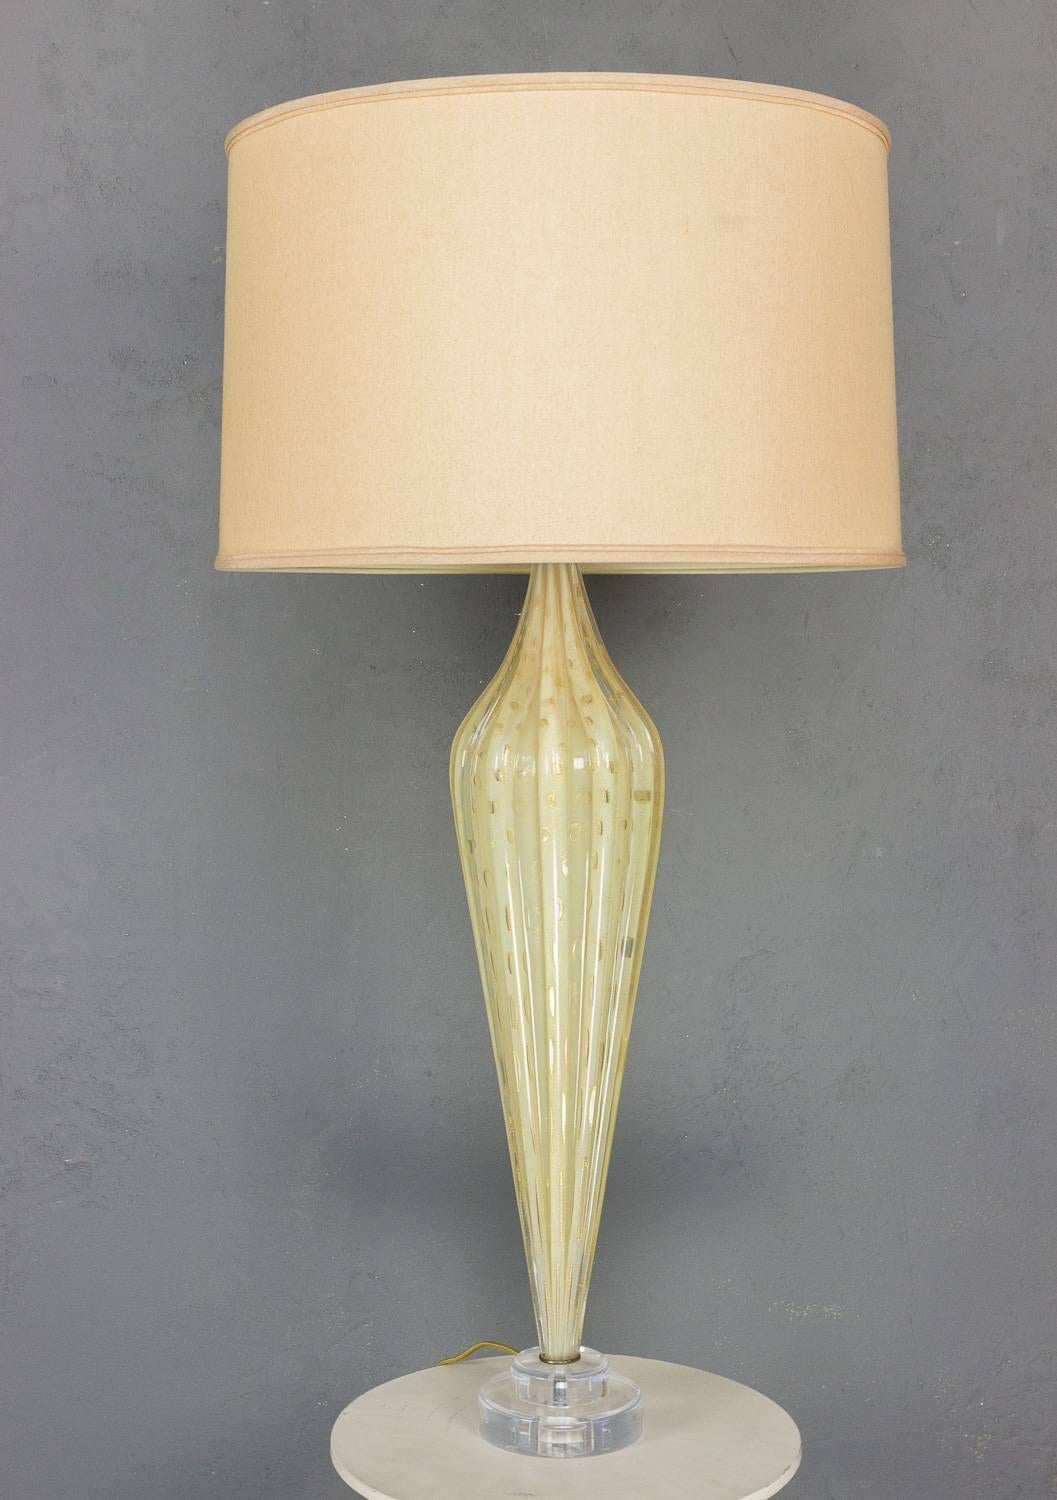 This is a rare and stunning handblown Murano lamp from the 1940s, crafted by skilled artisans in Italy. The lamp features ribbed glass in a beautiful golden yellow hue with intricate gold inclusions that add depth and texture. Recently rewired, this